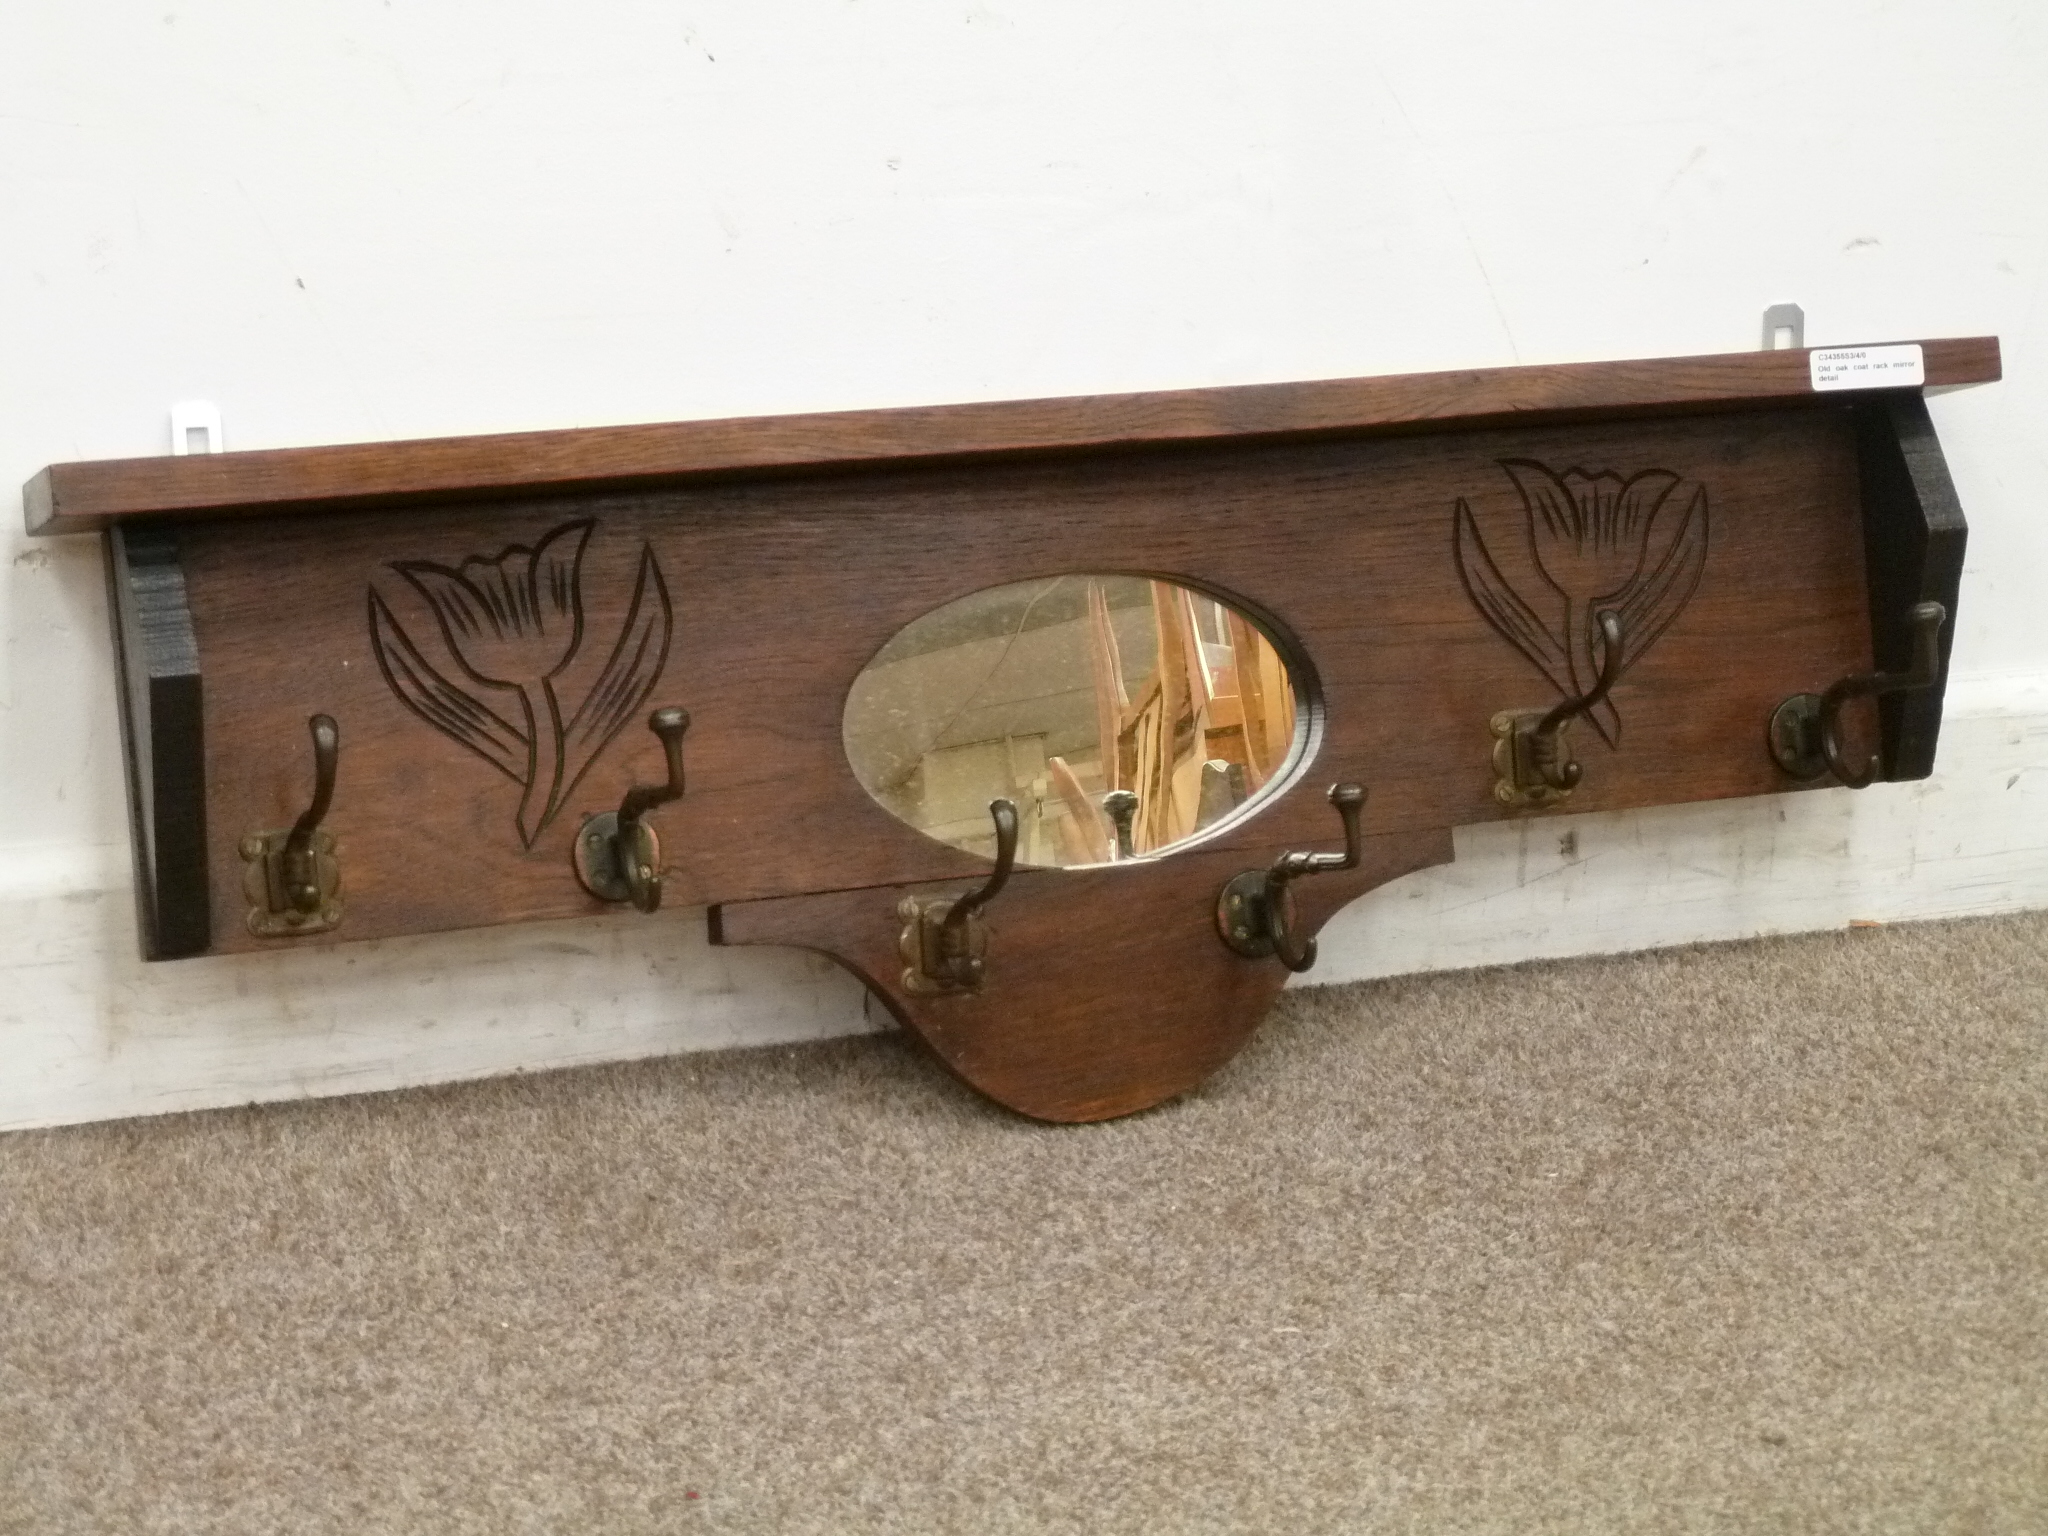 Early 20th century wall mounted coat rack, with carved flower details and mirror back, fitted with